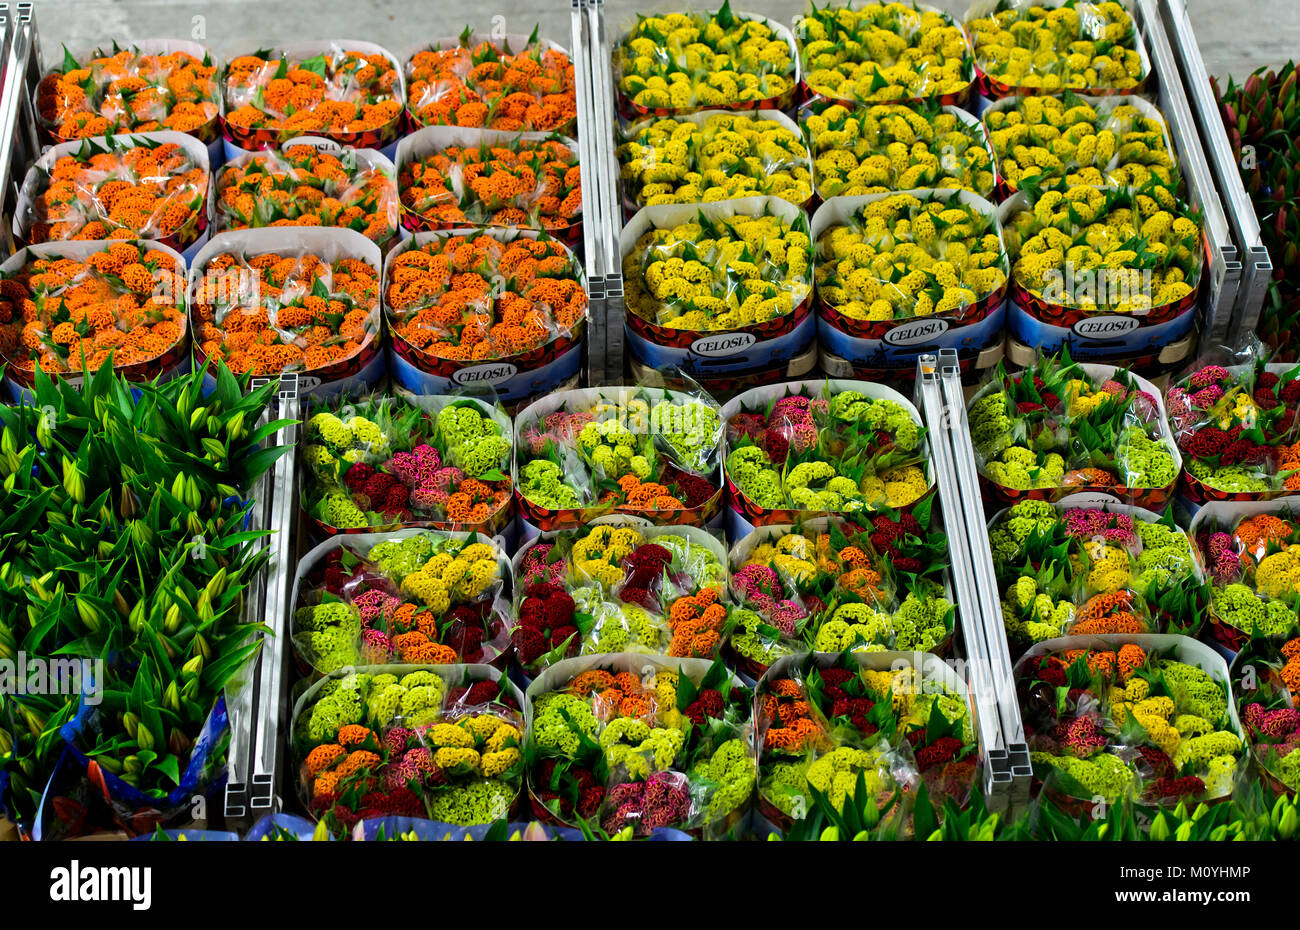 Different flowers ready for dispatch in boxes,Royal FloraHolland,Aalsmeer,Netherlands Stock Photo